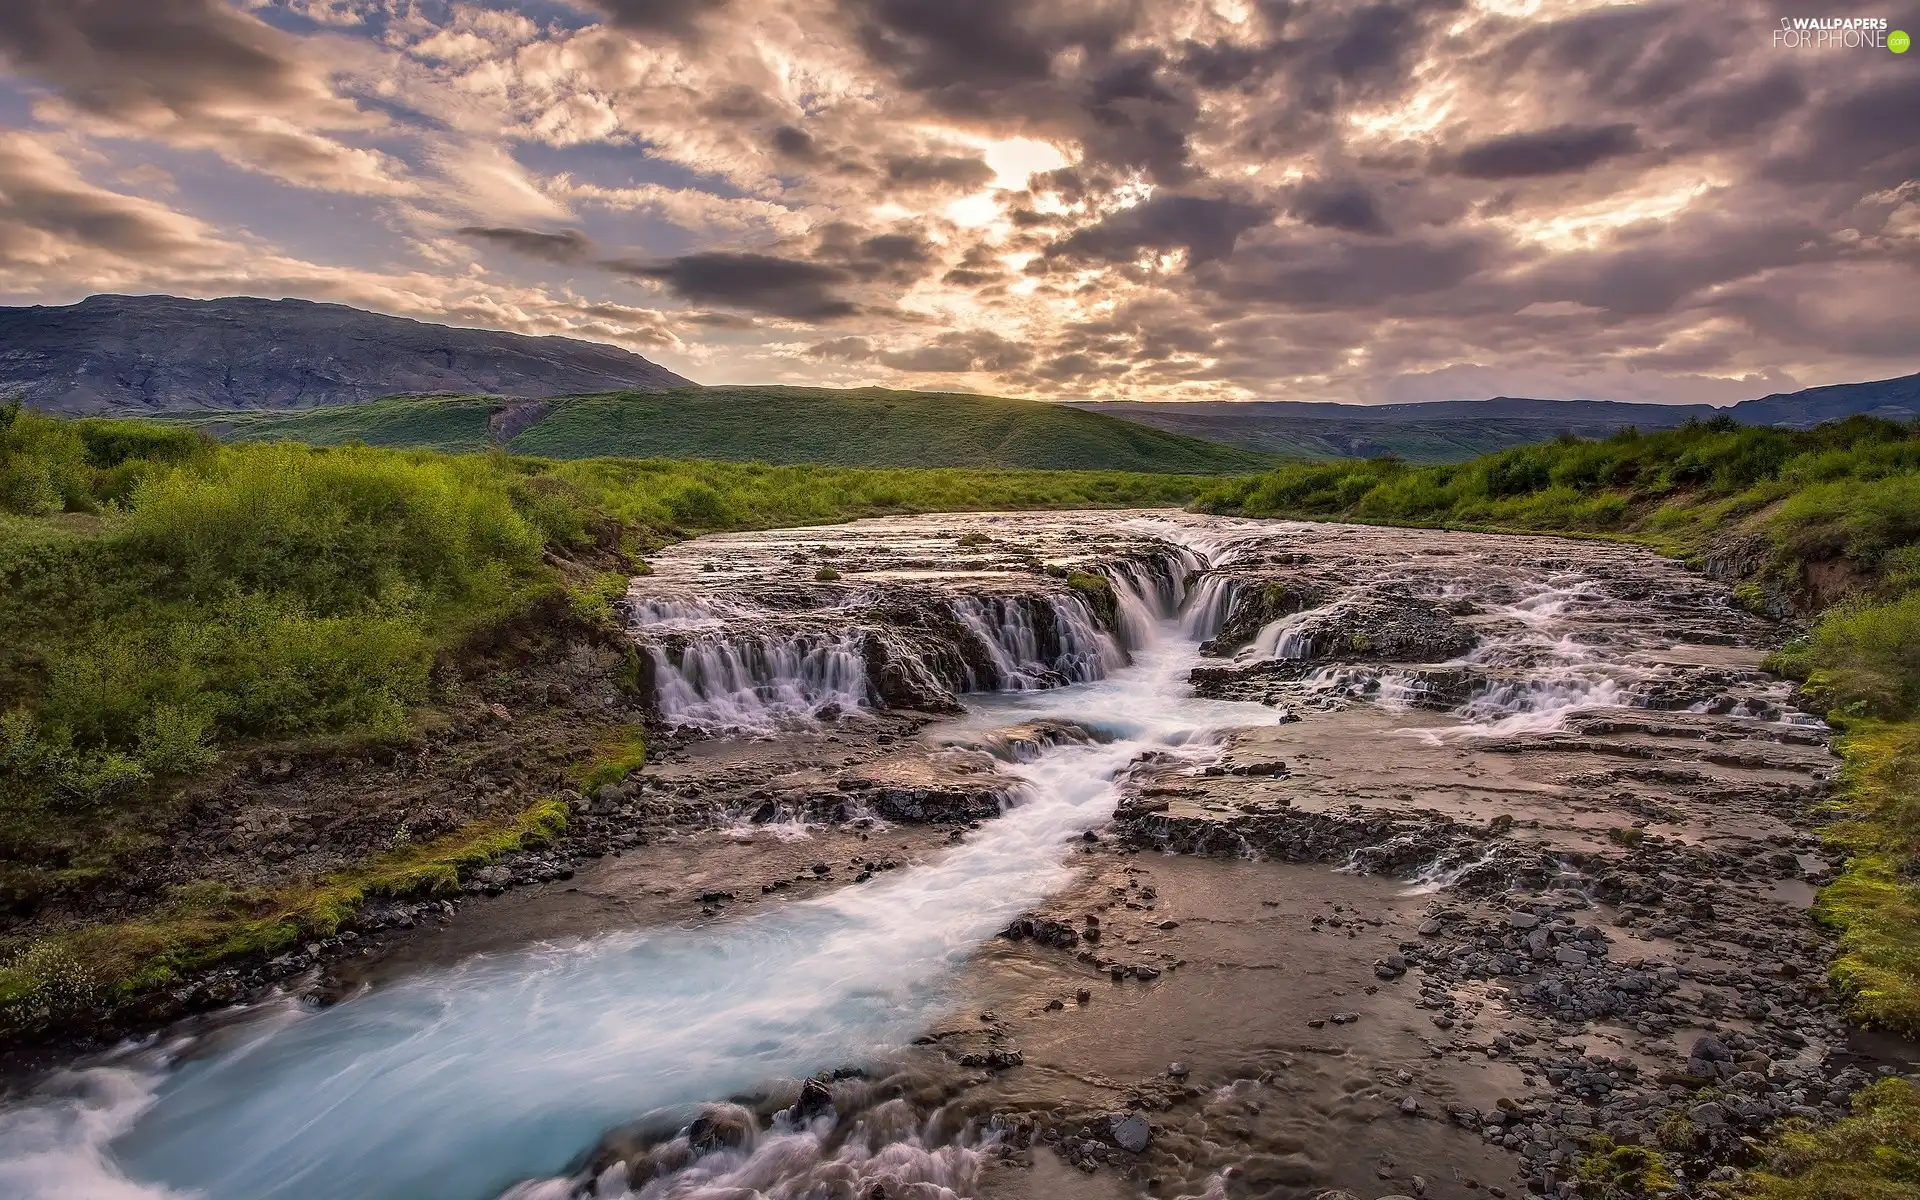 Bruarfoss Waterfall, clouds, Bruara River, The Hills, Sky, Great Sunsets, iceland